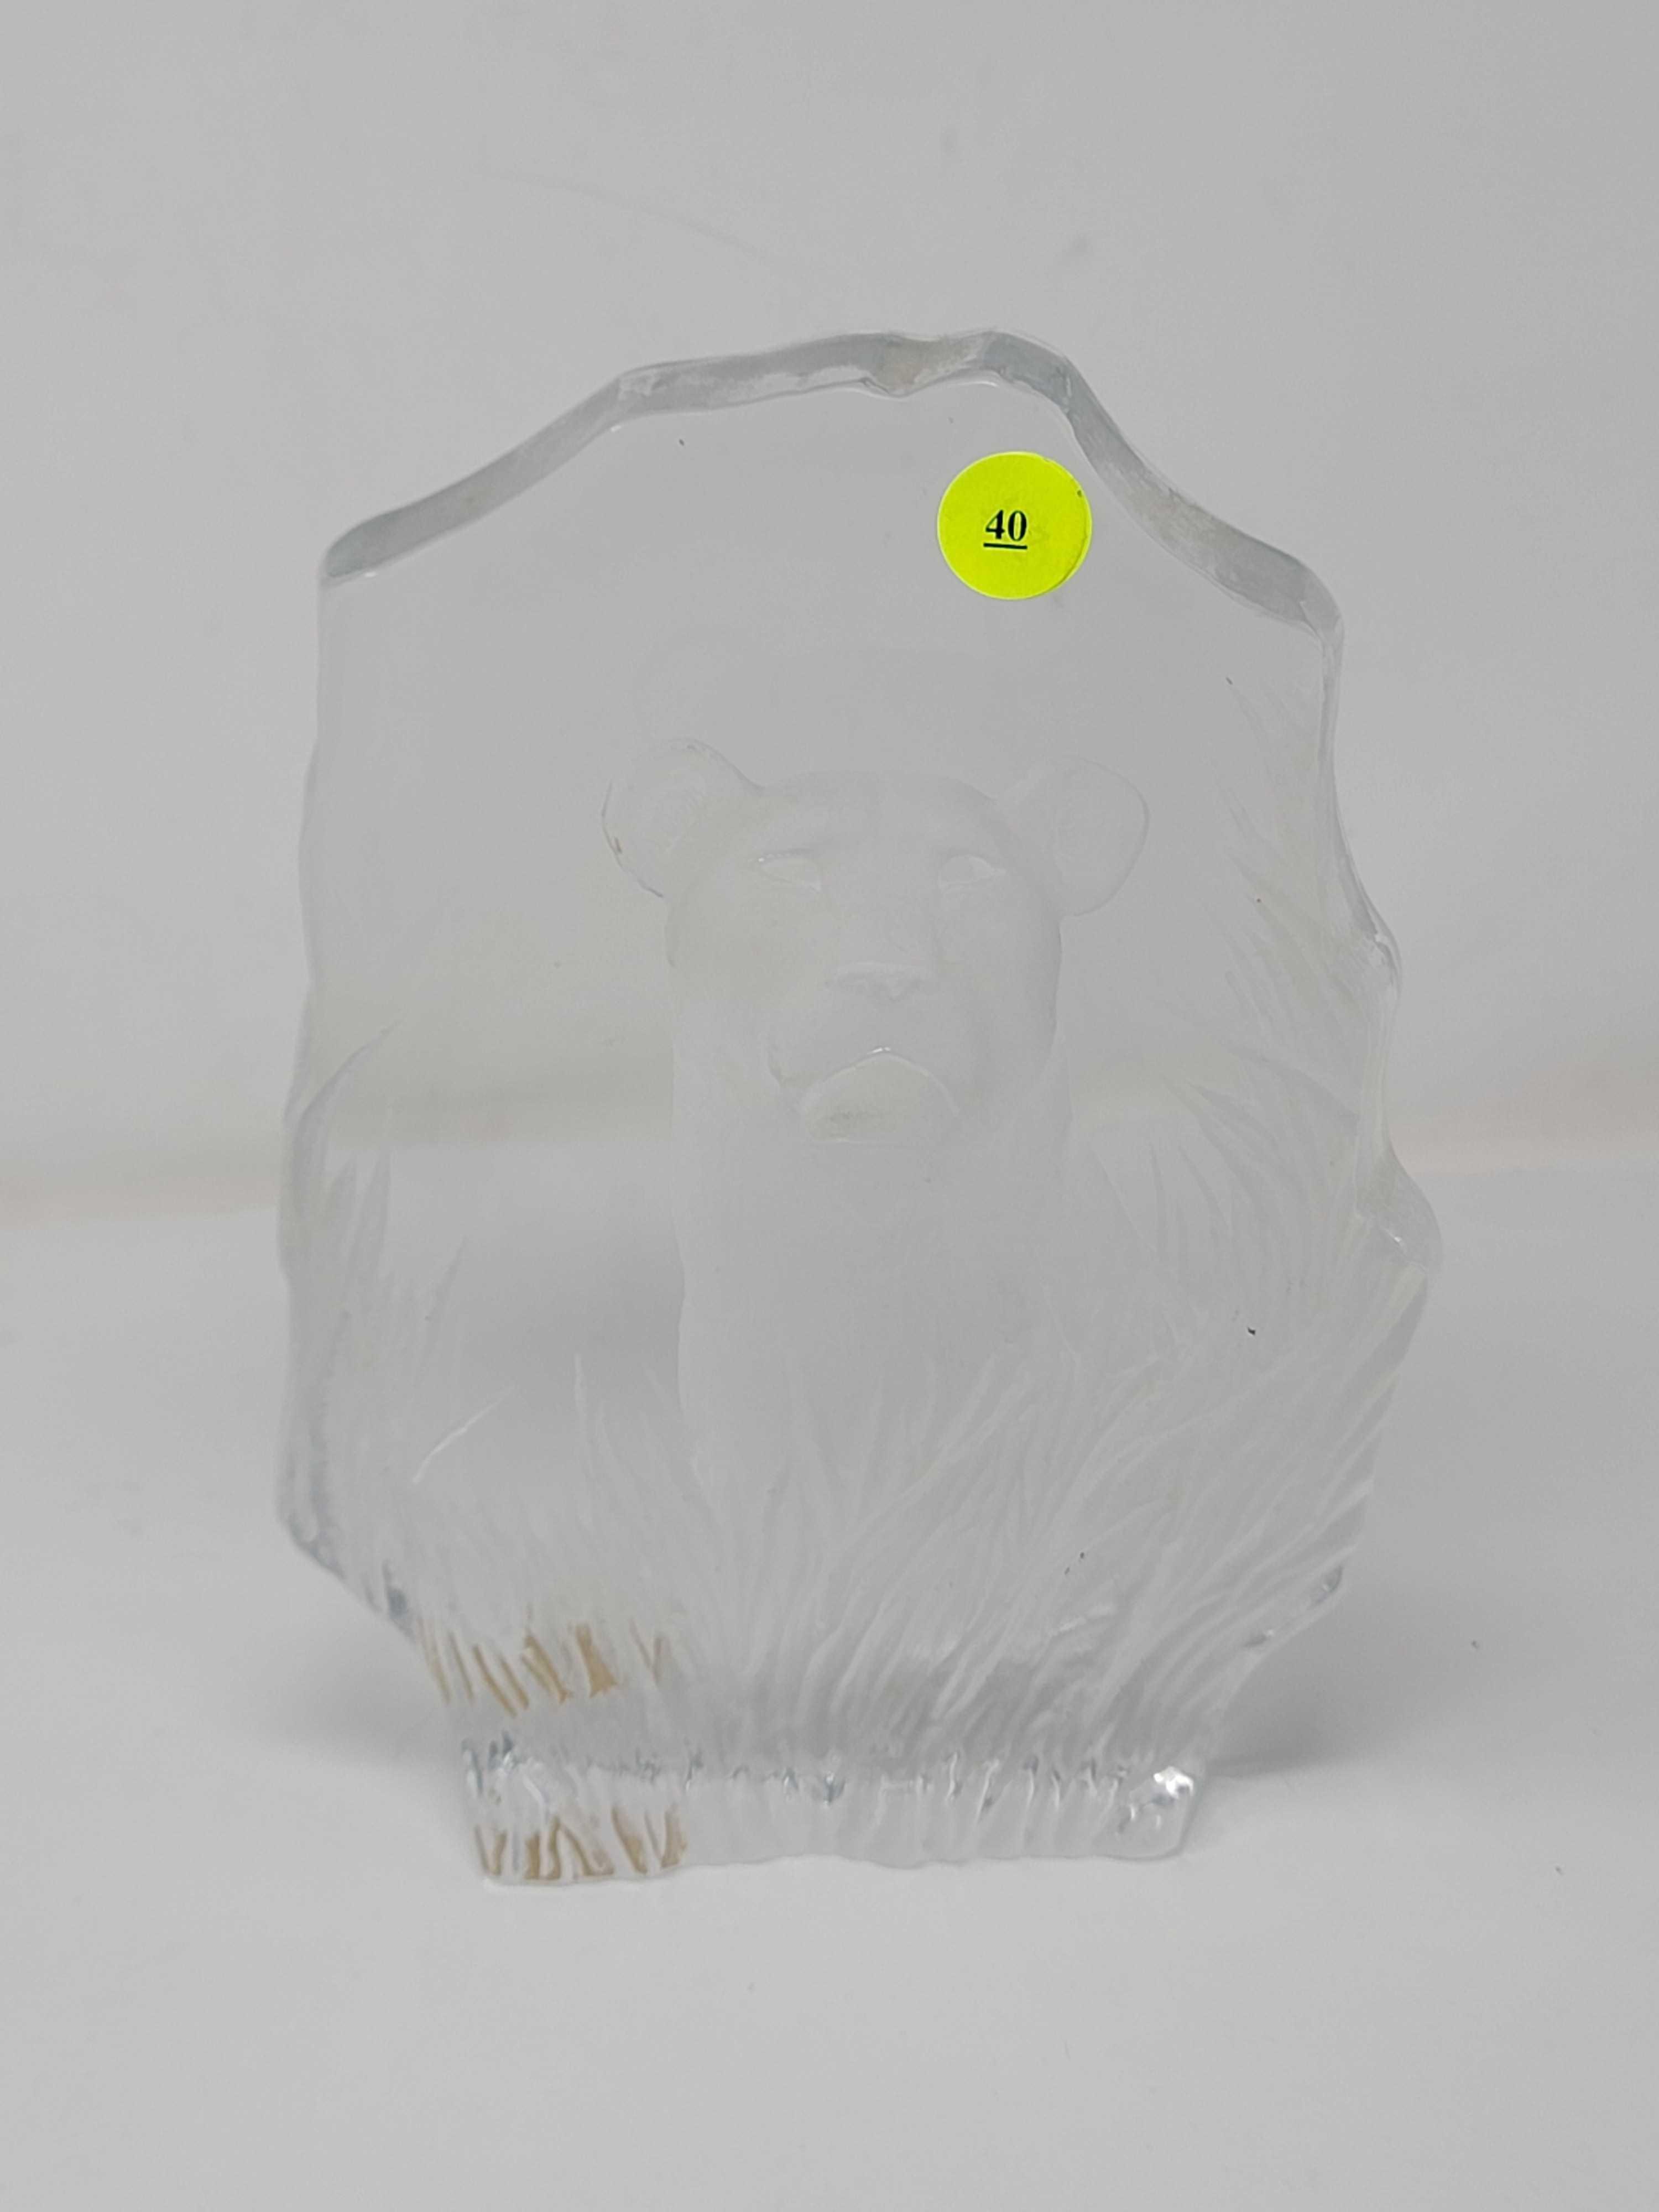 ROYAL KRONA MADE IN SWEDEN ETCHED CRYSTAL LION FIGURINE, 6 INCHES X 9 INCHES.